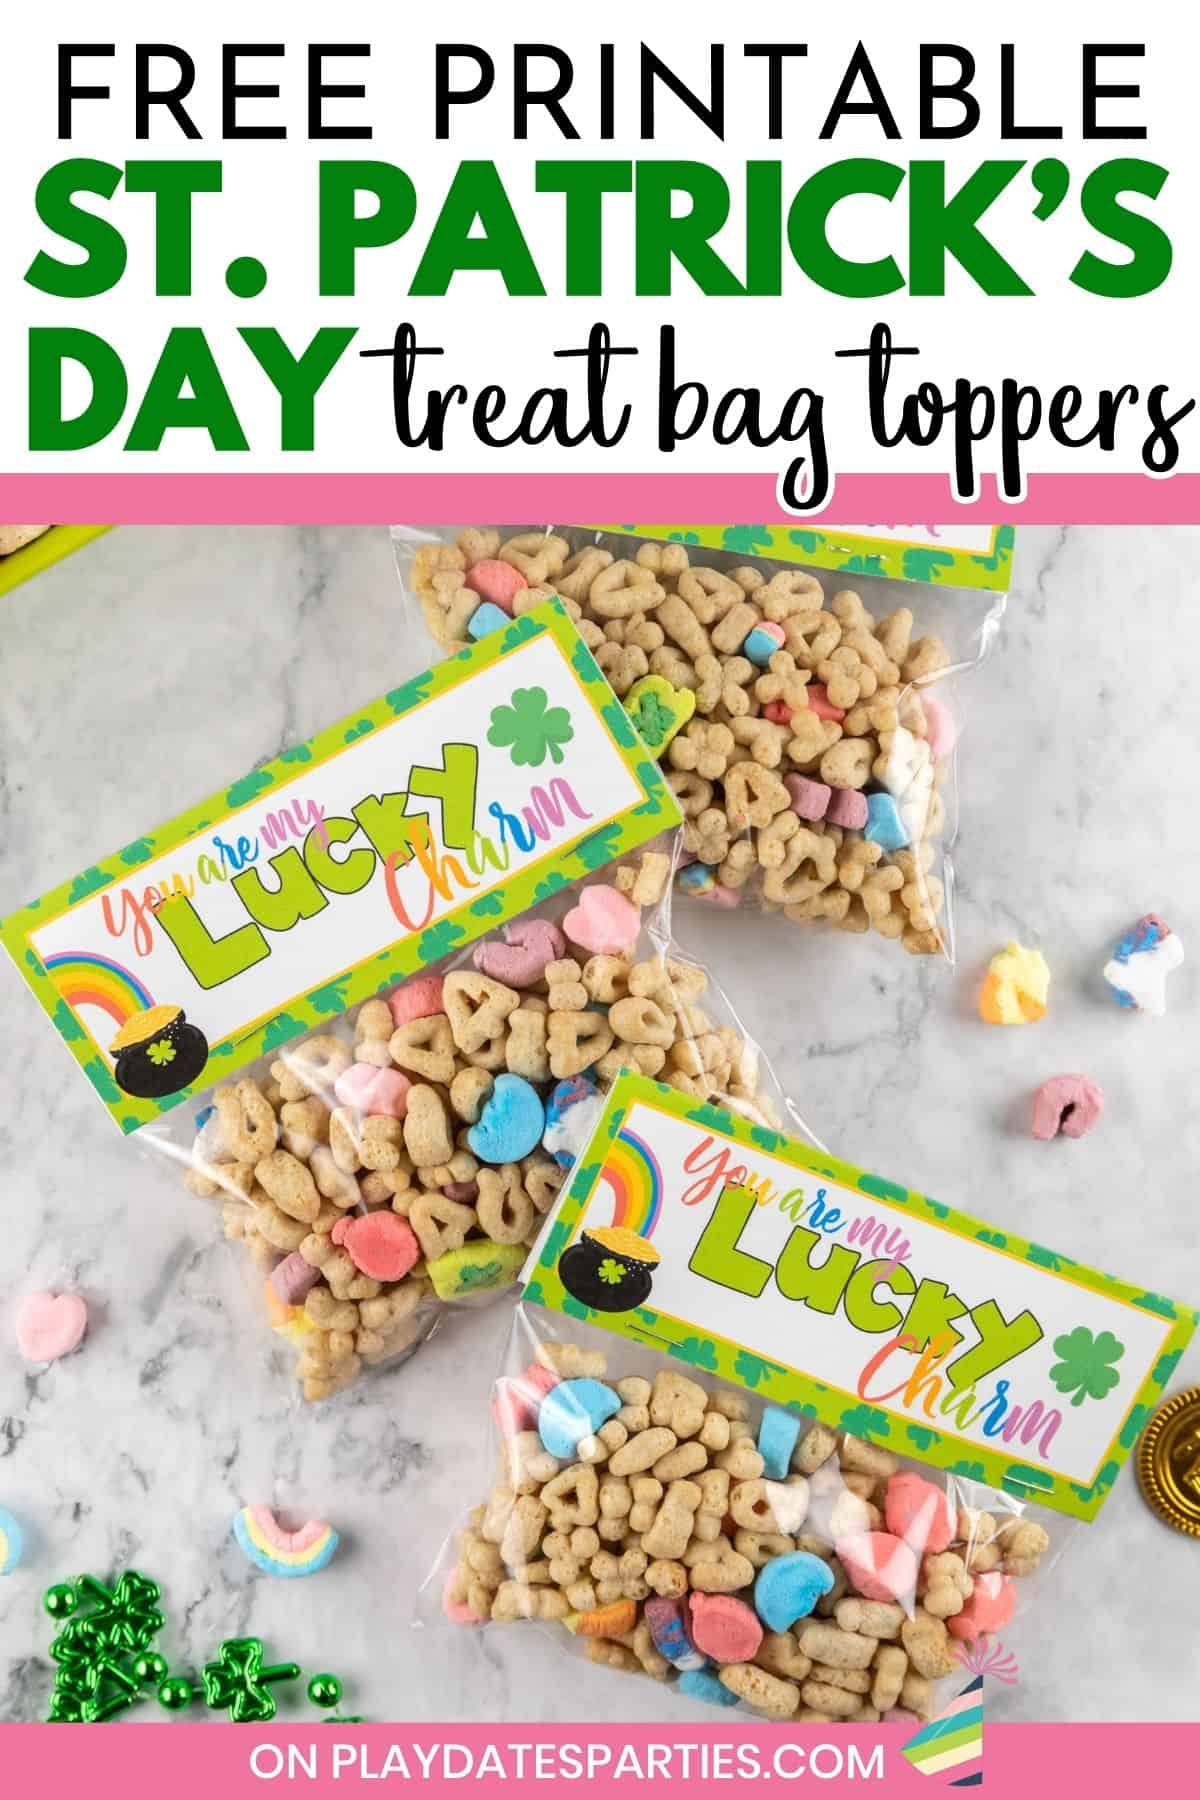 Free printable St Patricks Day treat bag toppers Pin Image.